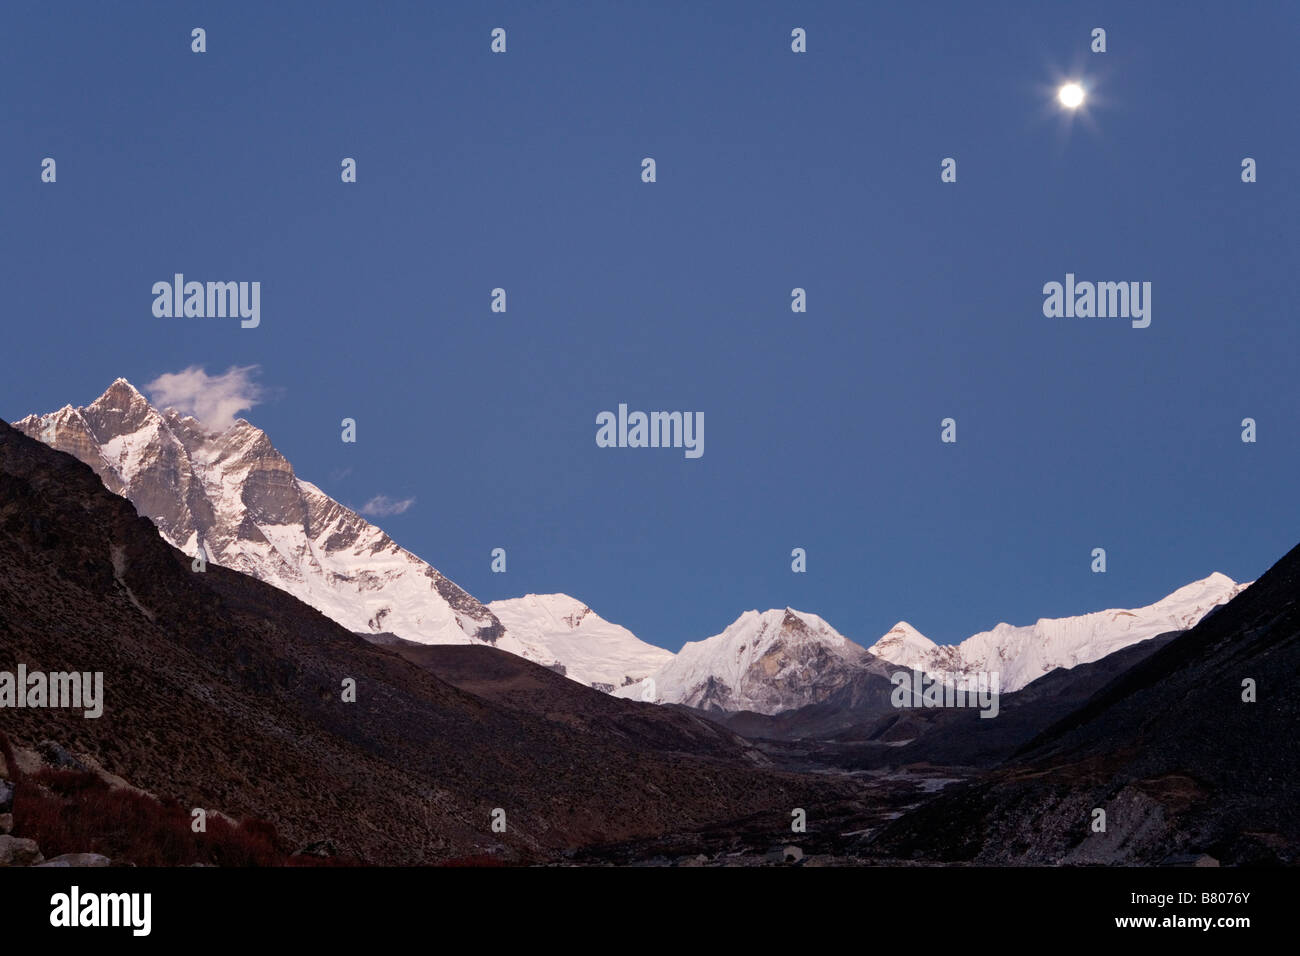 Scenic of Chukung Valley at nightime with majestic Lhotse peak seen on left side in Khumbu region Nepal Stock Photo